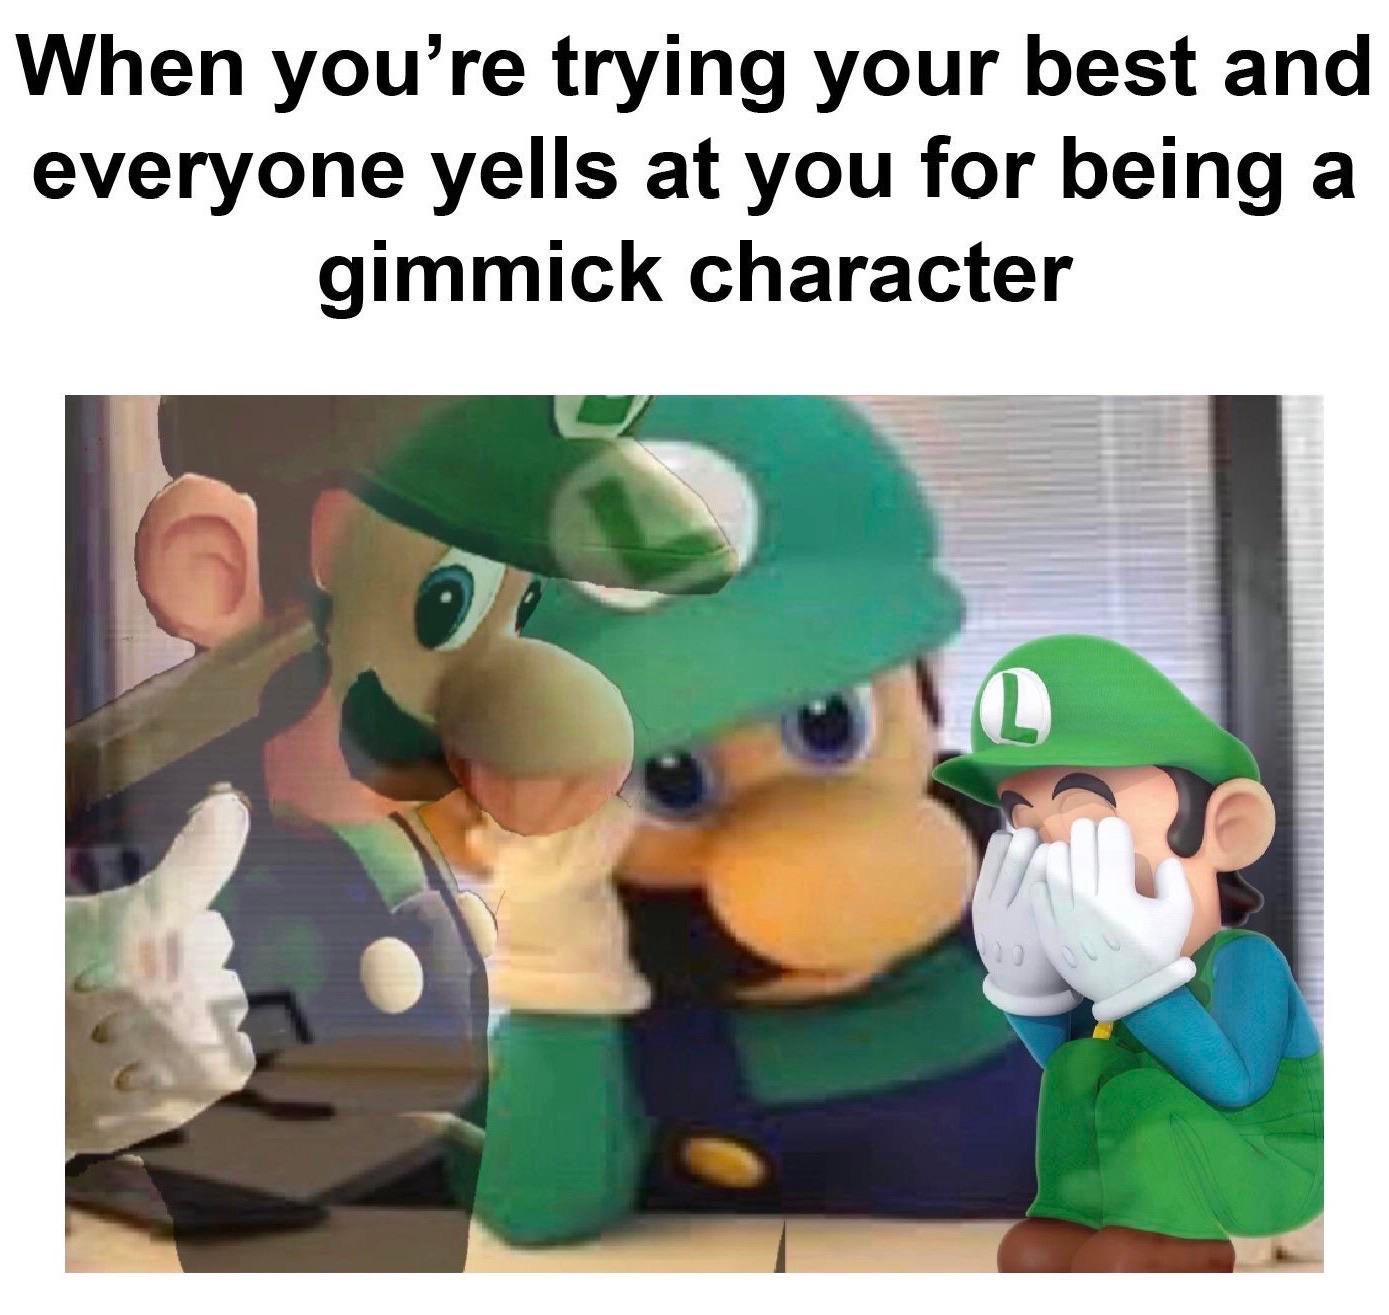 smash bros memes - dank memes- luigi memes - When you're trying your best and everyone yells at you for being a gimmick character L